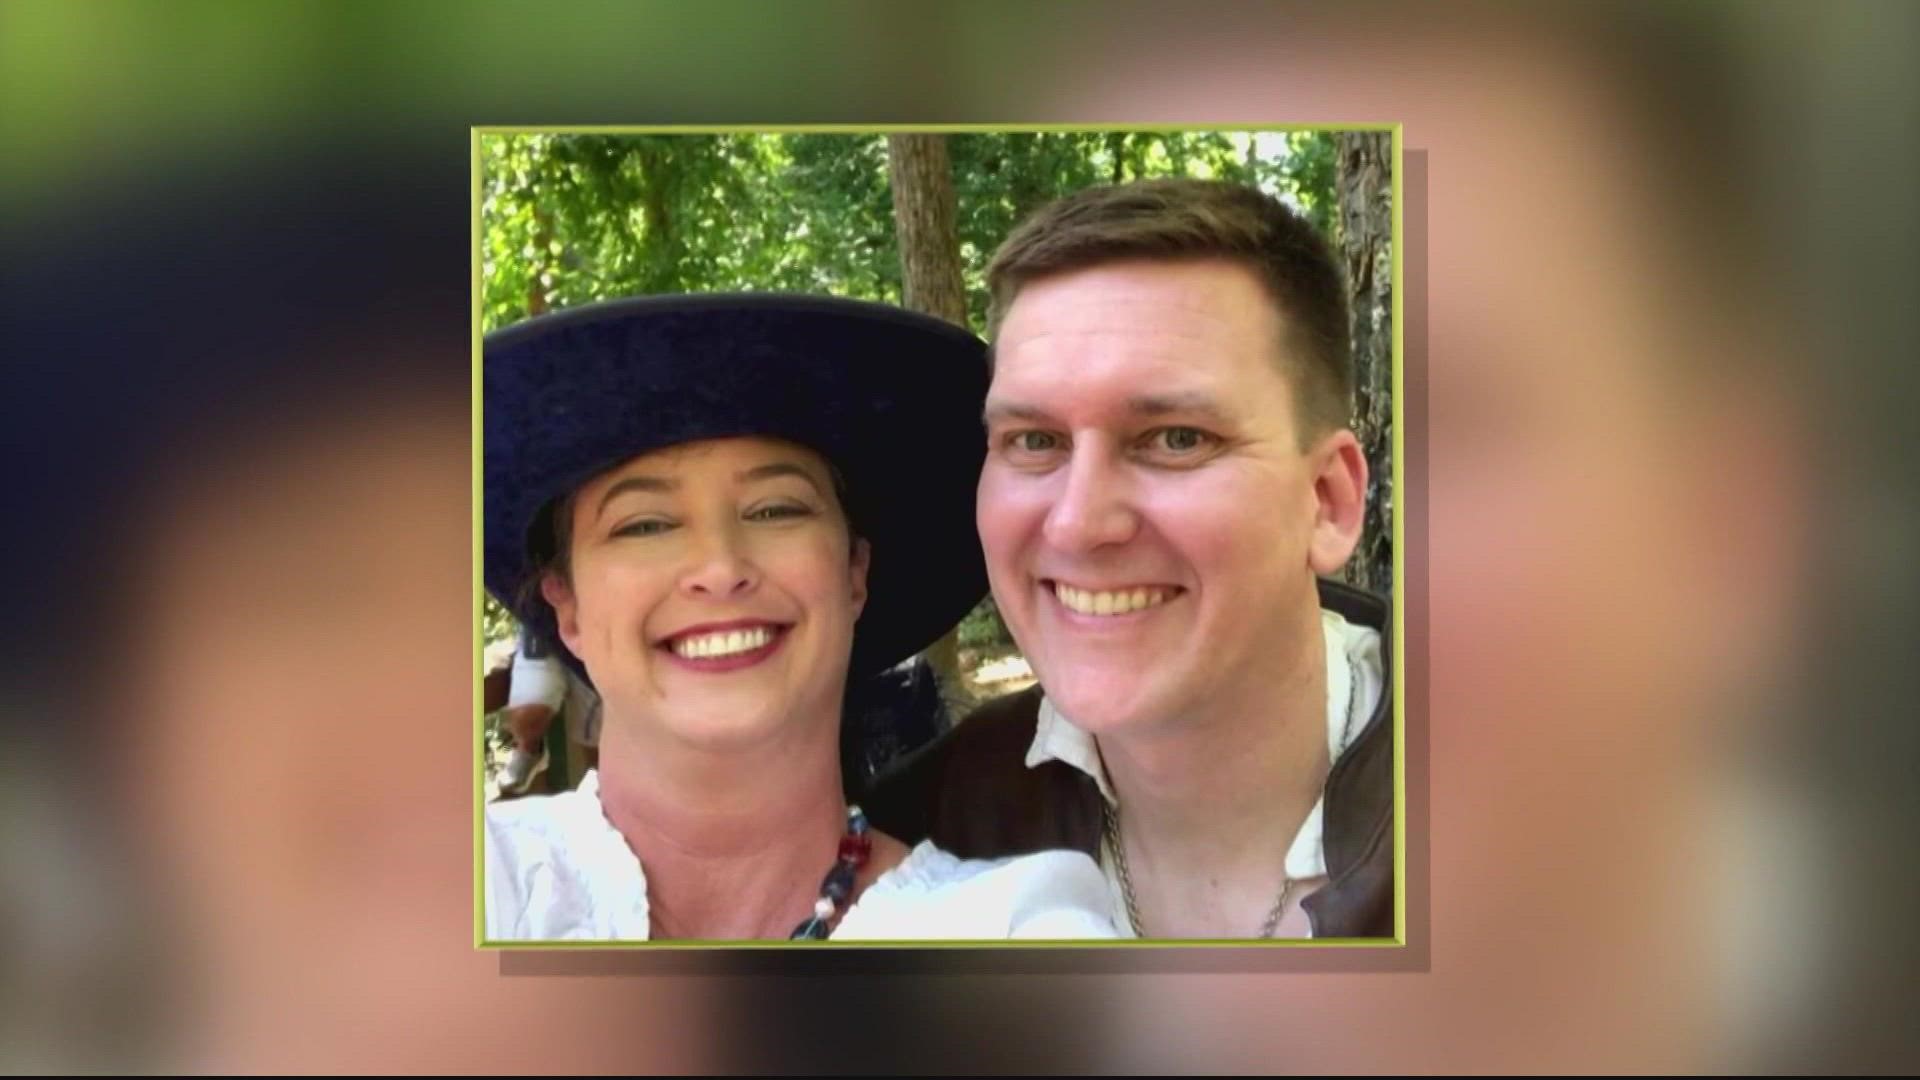 A married couple from Annapolis, Maryland, has admitted conspiring to sell nuclear secrets to an undercover F.B.I agent. A trial is now set for January.